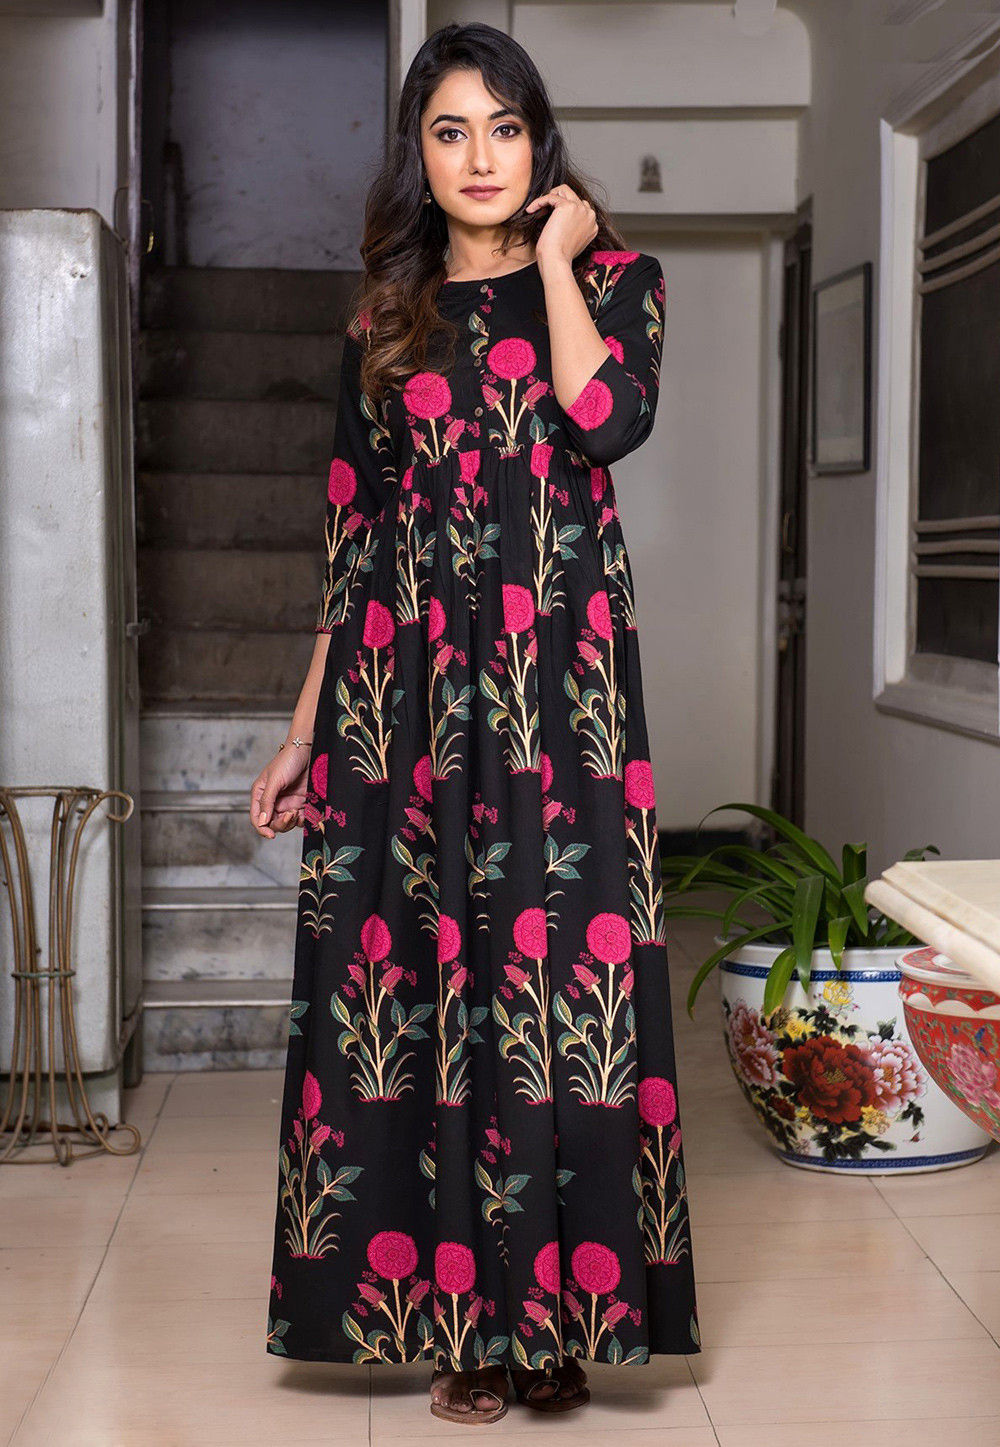 Cotton Maxi Dresses - Shop for Cotton Maxi Dress at Best Price in India |  Myntra